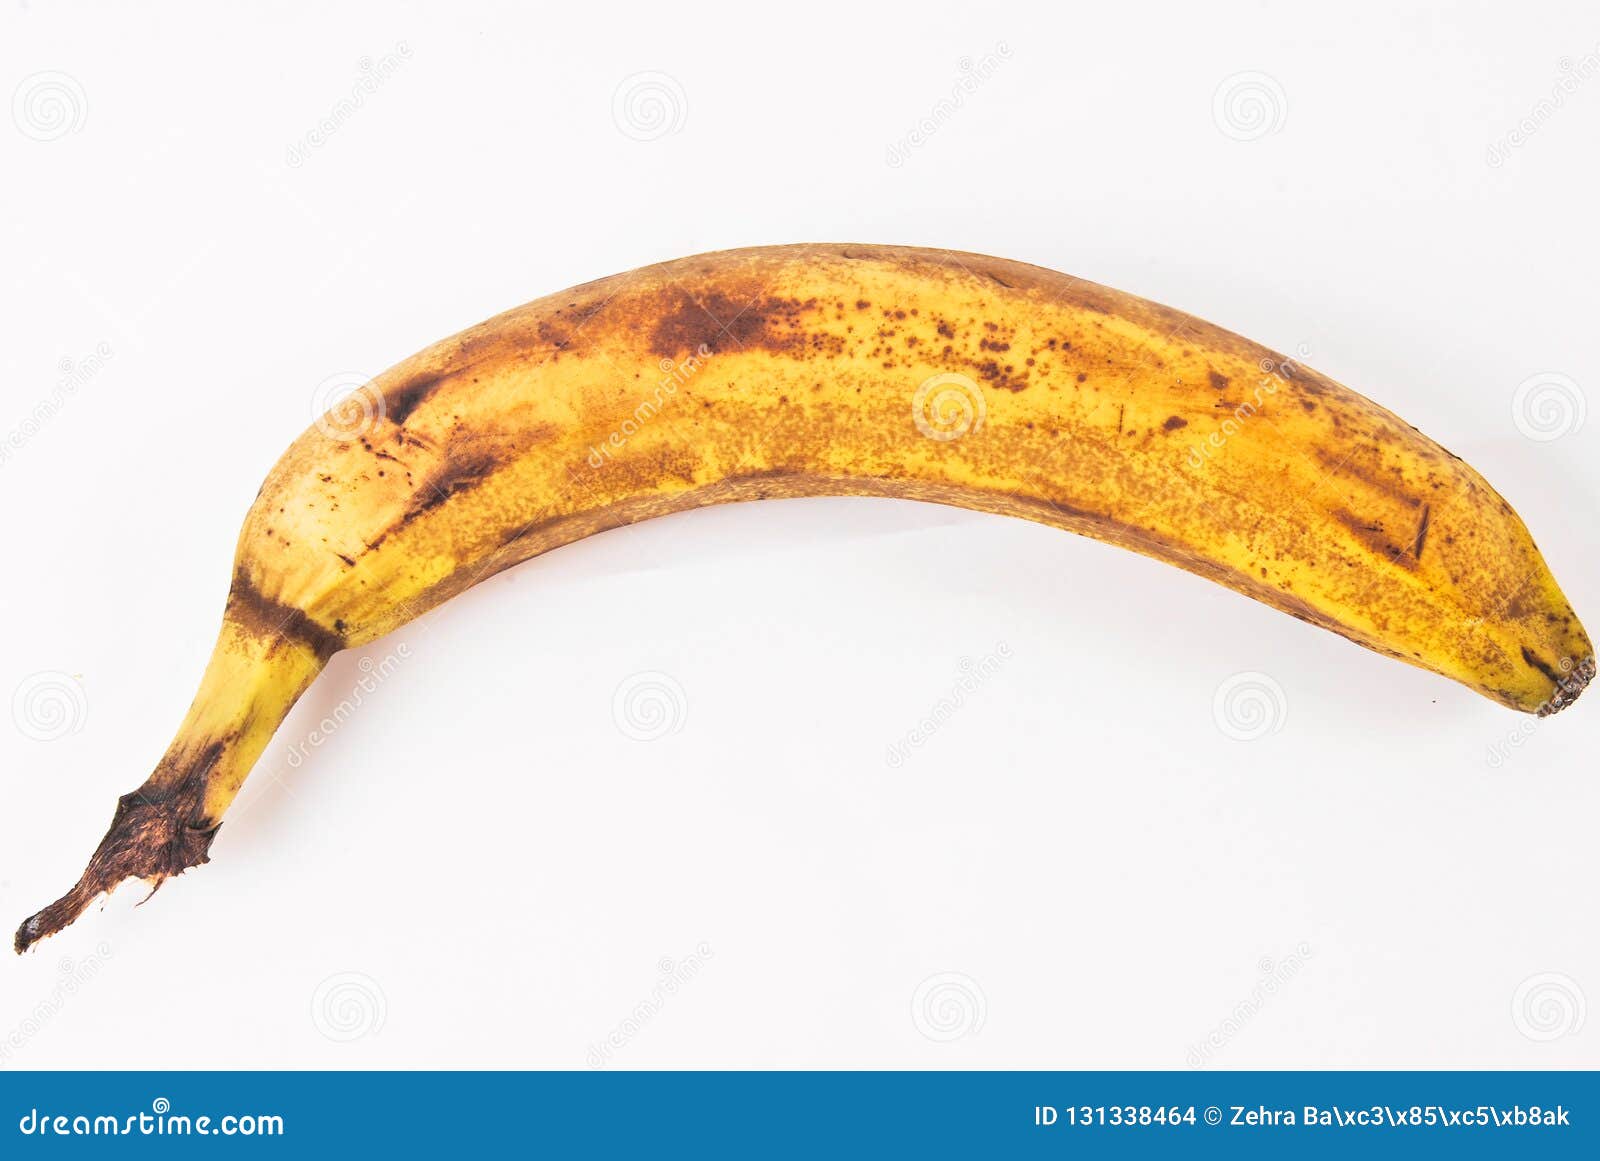 a old banana that has begun to decay